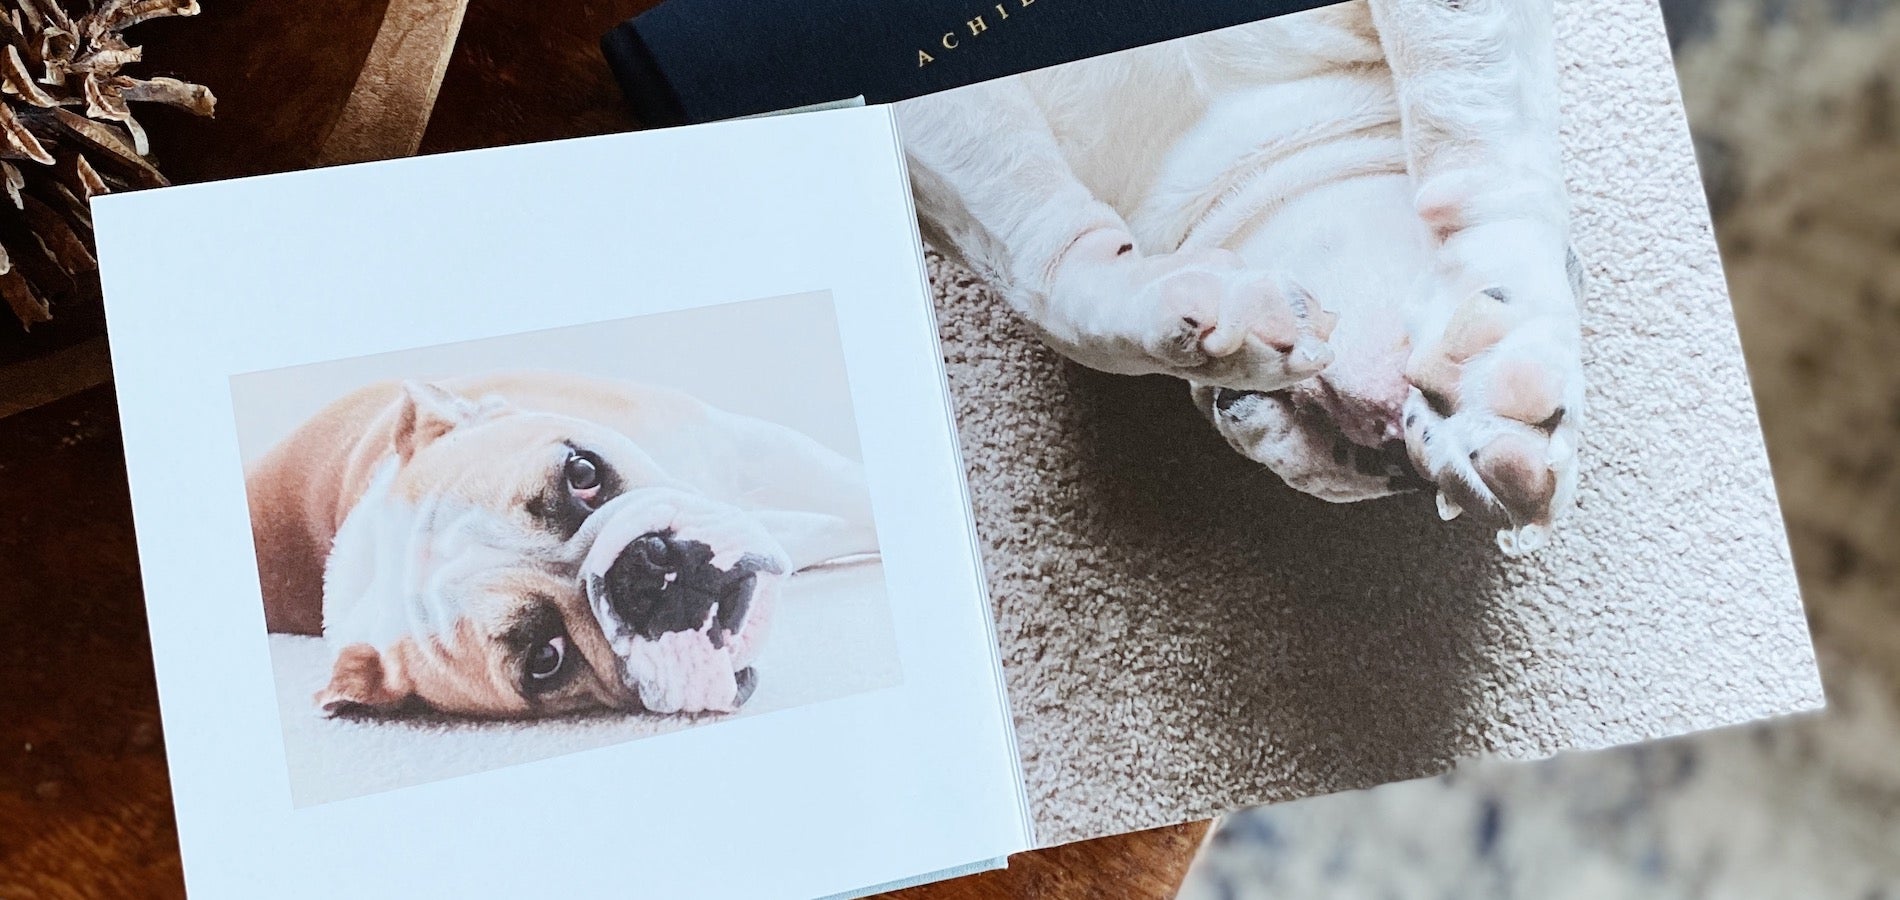 Artifact Uprising Everyday Photo Book on coffee table opened to photos of cute bulldog